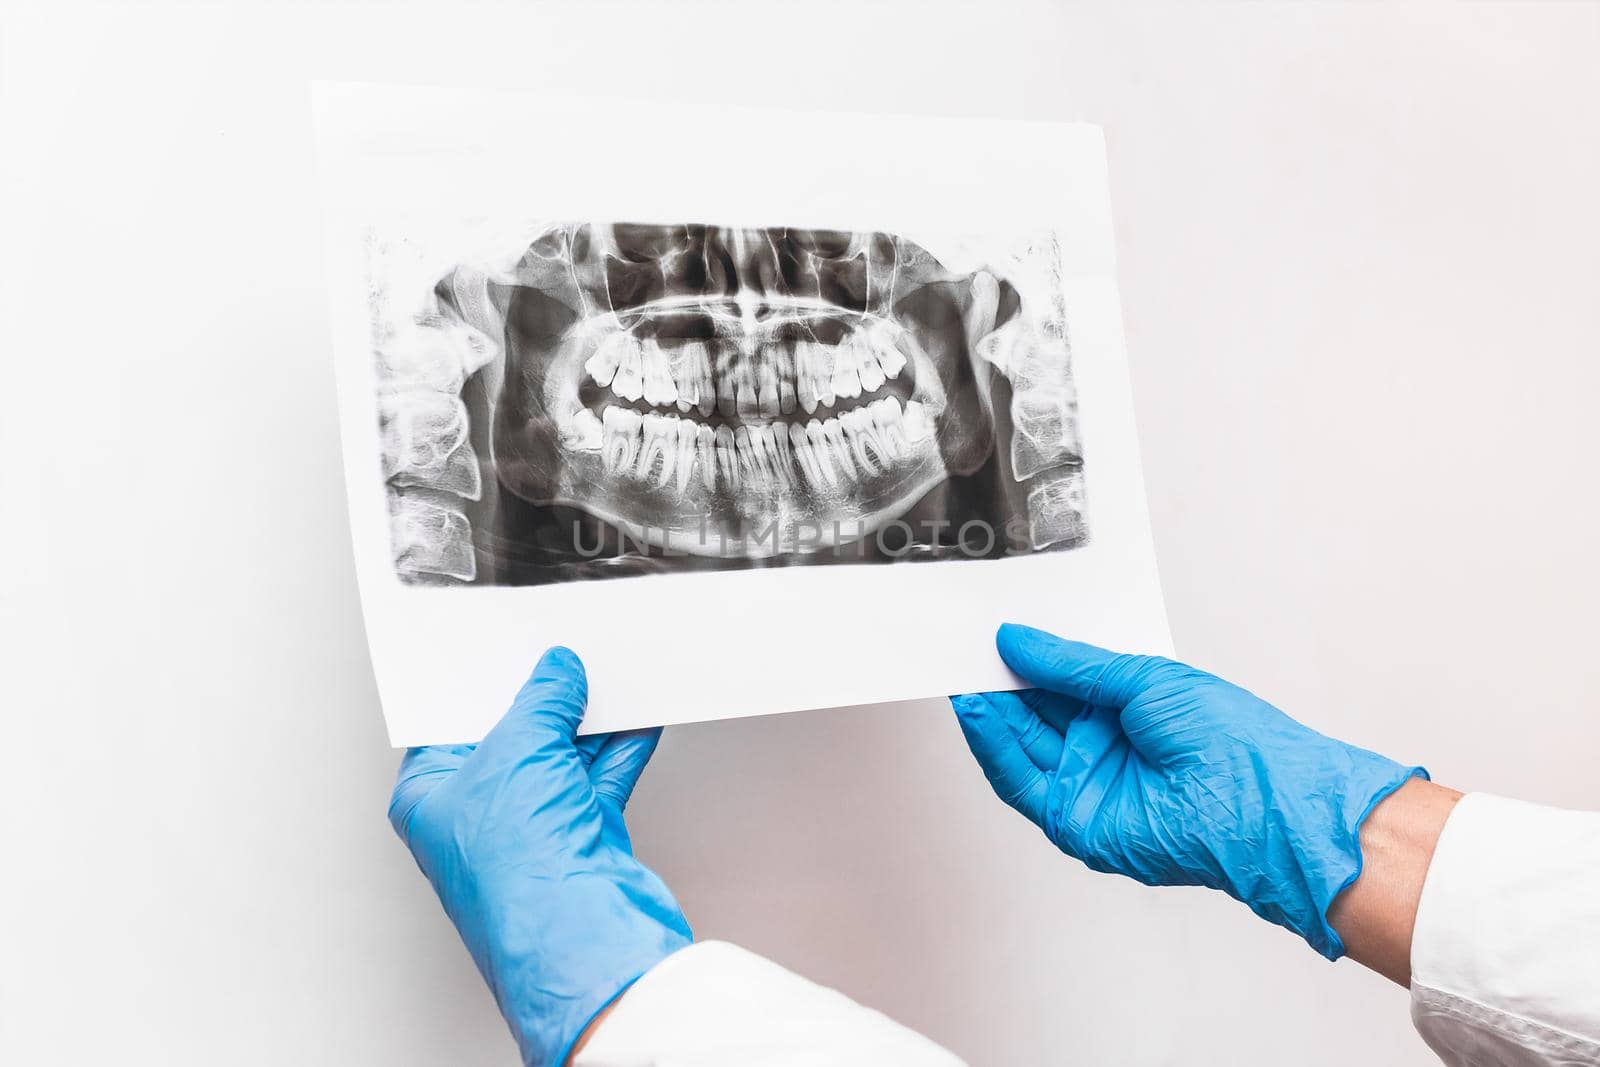 Doctor's hands in protective medical gloves are holding and examining an x-ray picture of teeth on a white background by AYDO8